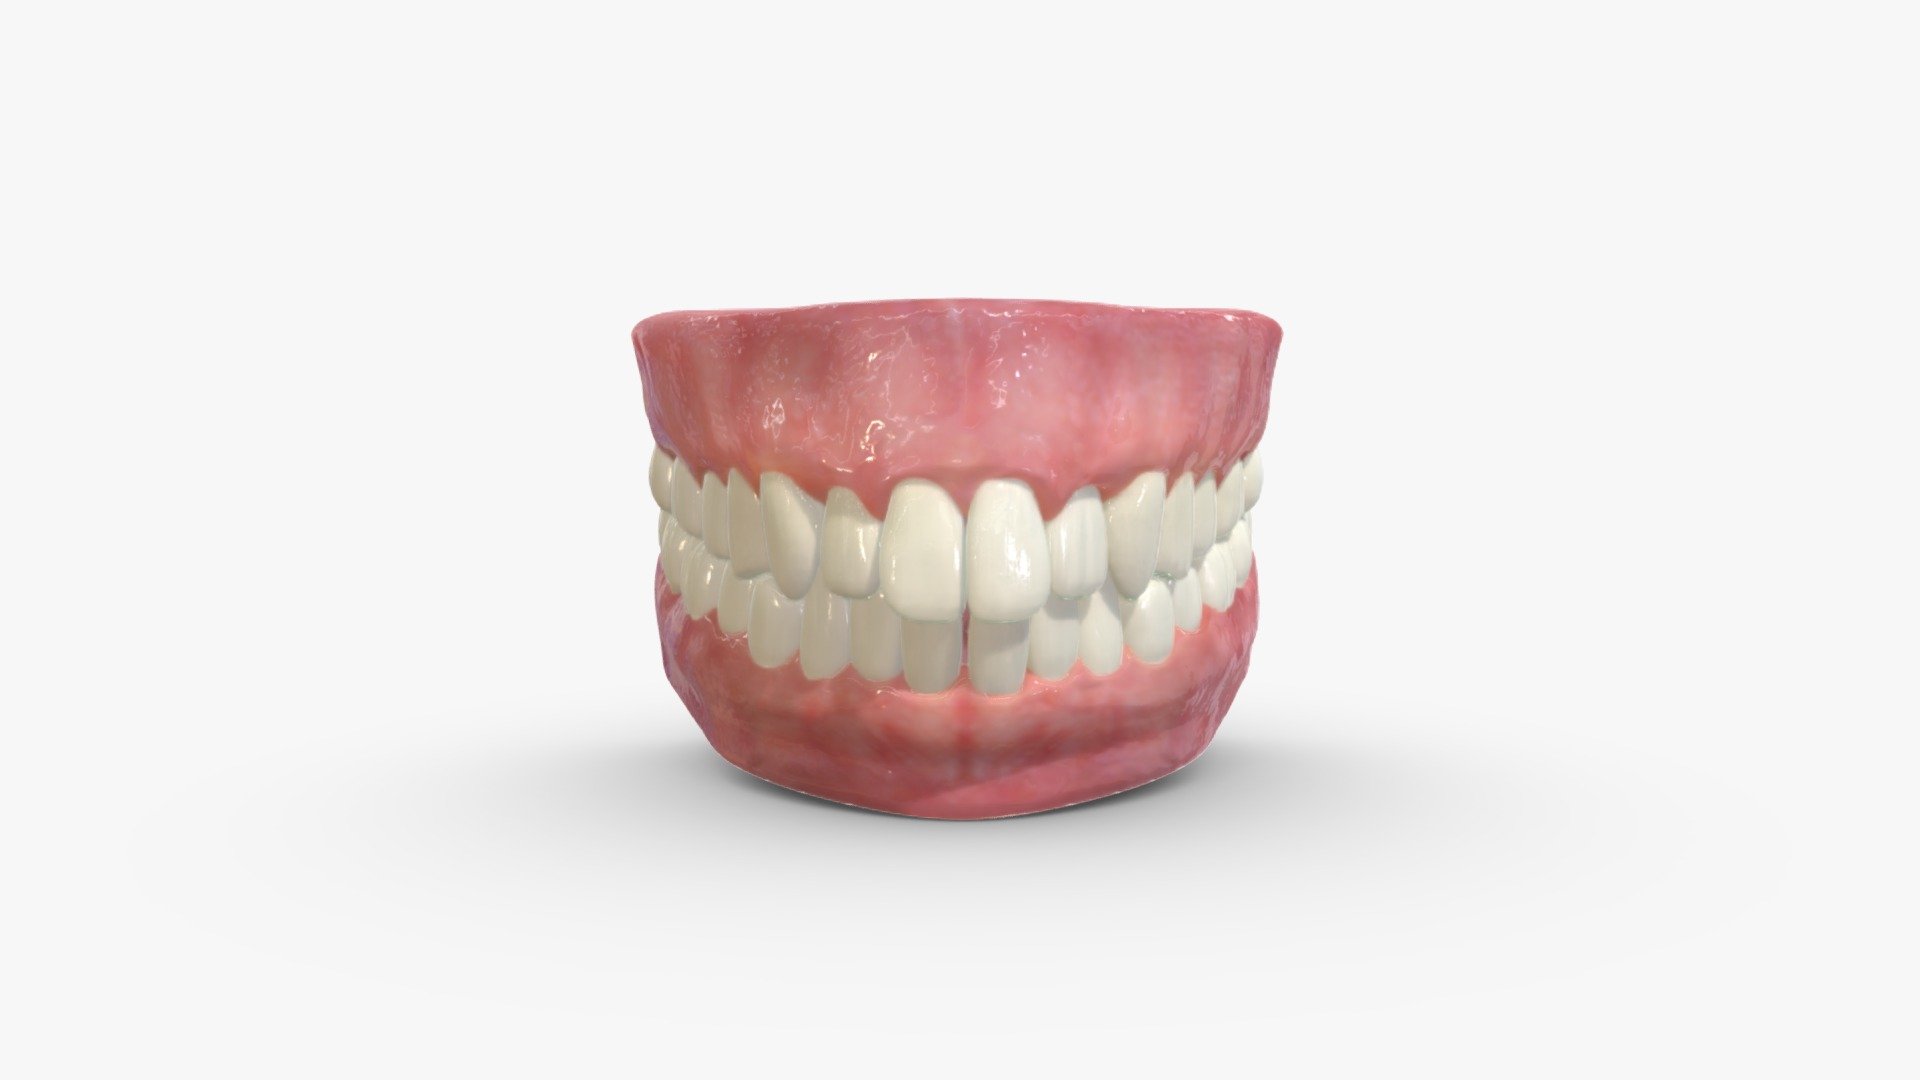 🙏 If you use these model for visual reference consider buying me a ☕ It would really help me out!  https://ko-fi.com/heledahn


This is a digital 3d model of a realistic mouth, with proportionate teeth, gums and a tongue. 






👉 I have other types of teeth avaliable at my shop with different proportions/configurations.

This model can be used either as a background prop, or as a closeup prop due to its high detail and visual quality.

This product will achieve realistic results in your rendering projects and animations, being greatly suited for close-ups due to their high quality topology and PBR shading 3d model